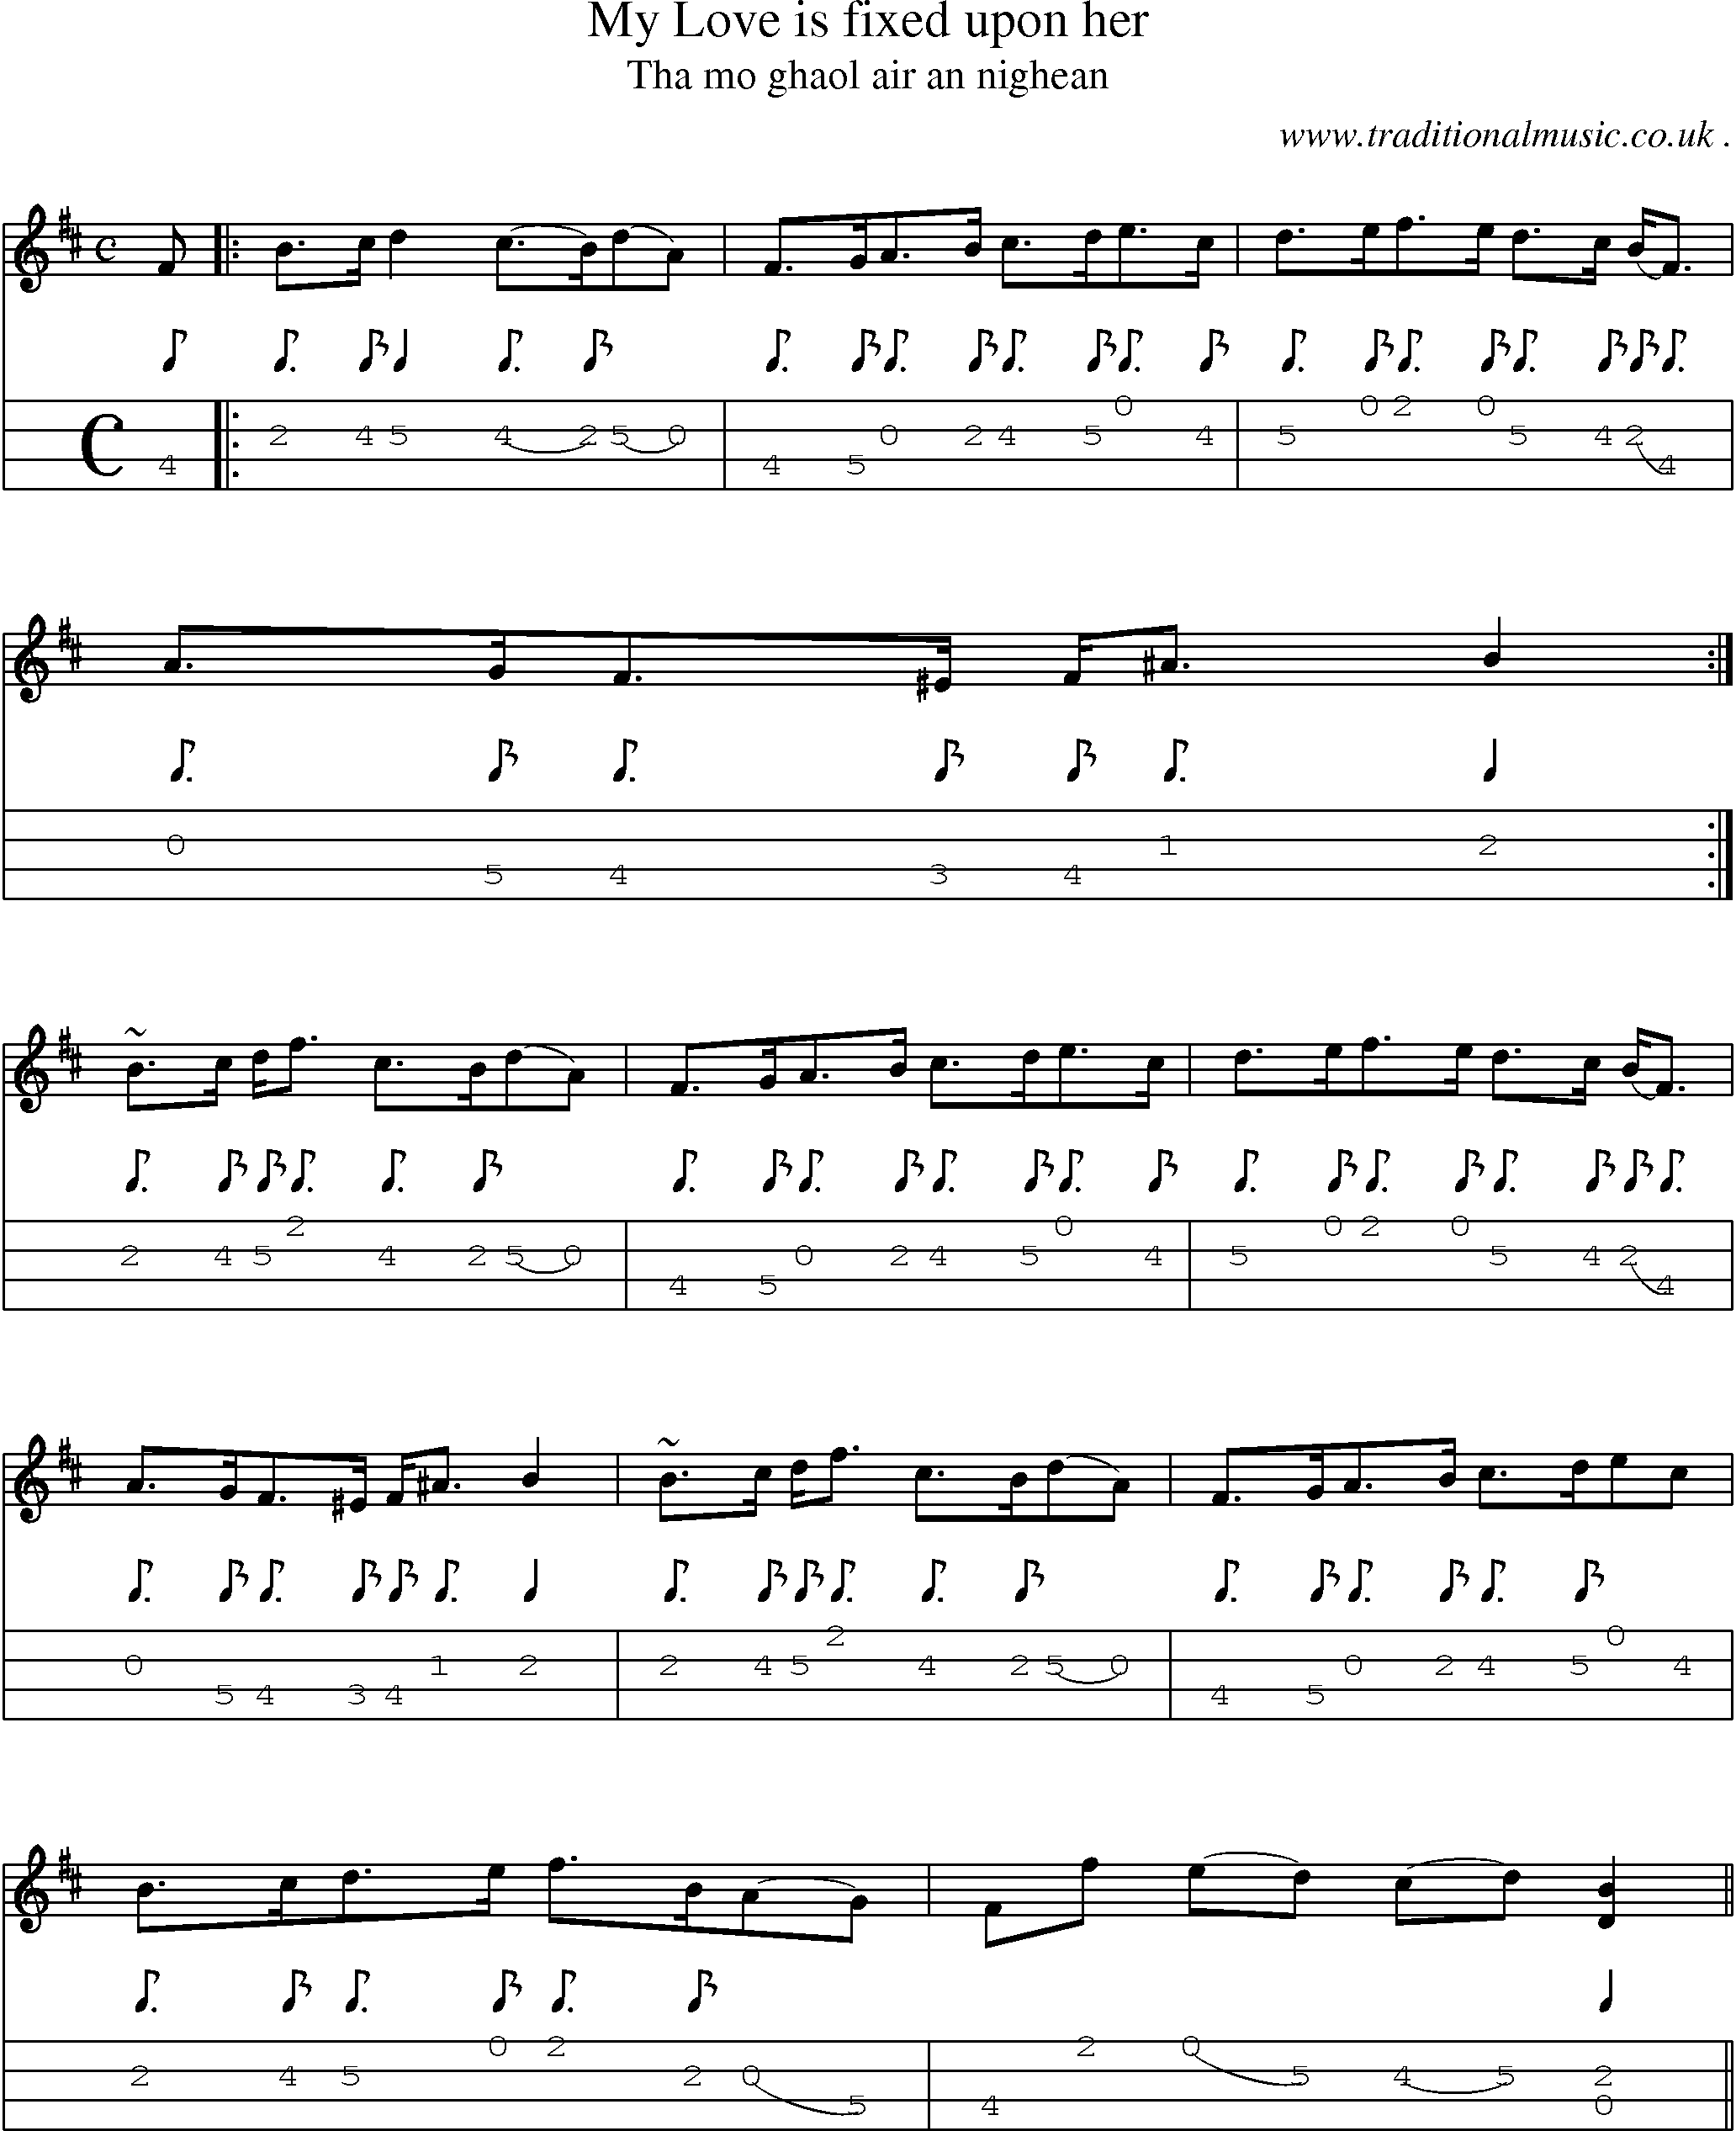 Sheet-music  score, Chords and Mandolin Tabs for My Love Is Fixed Upon Her